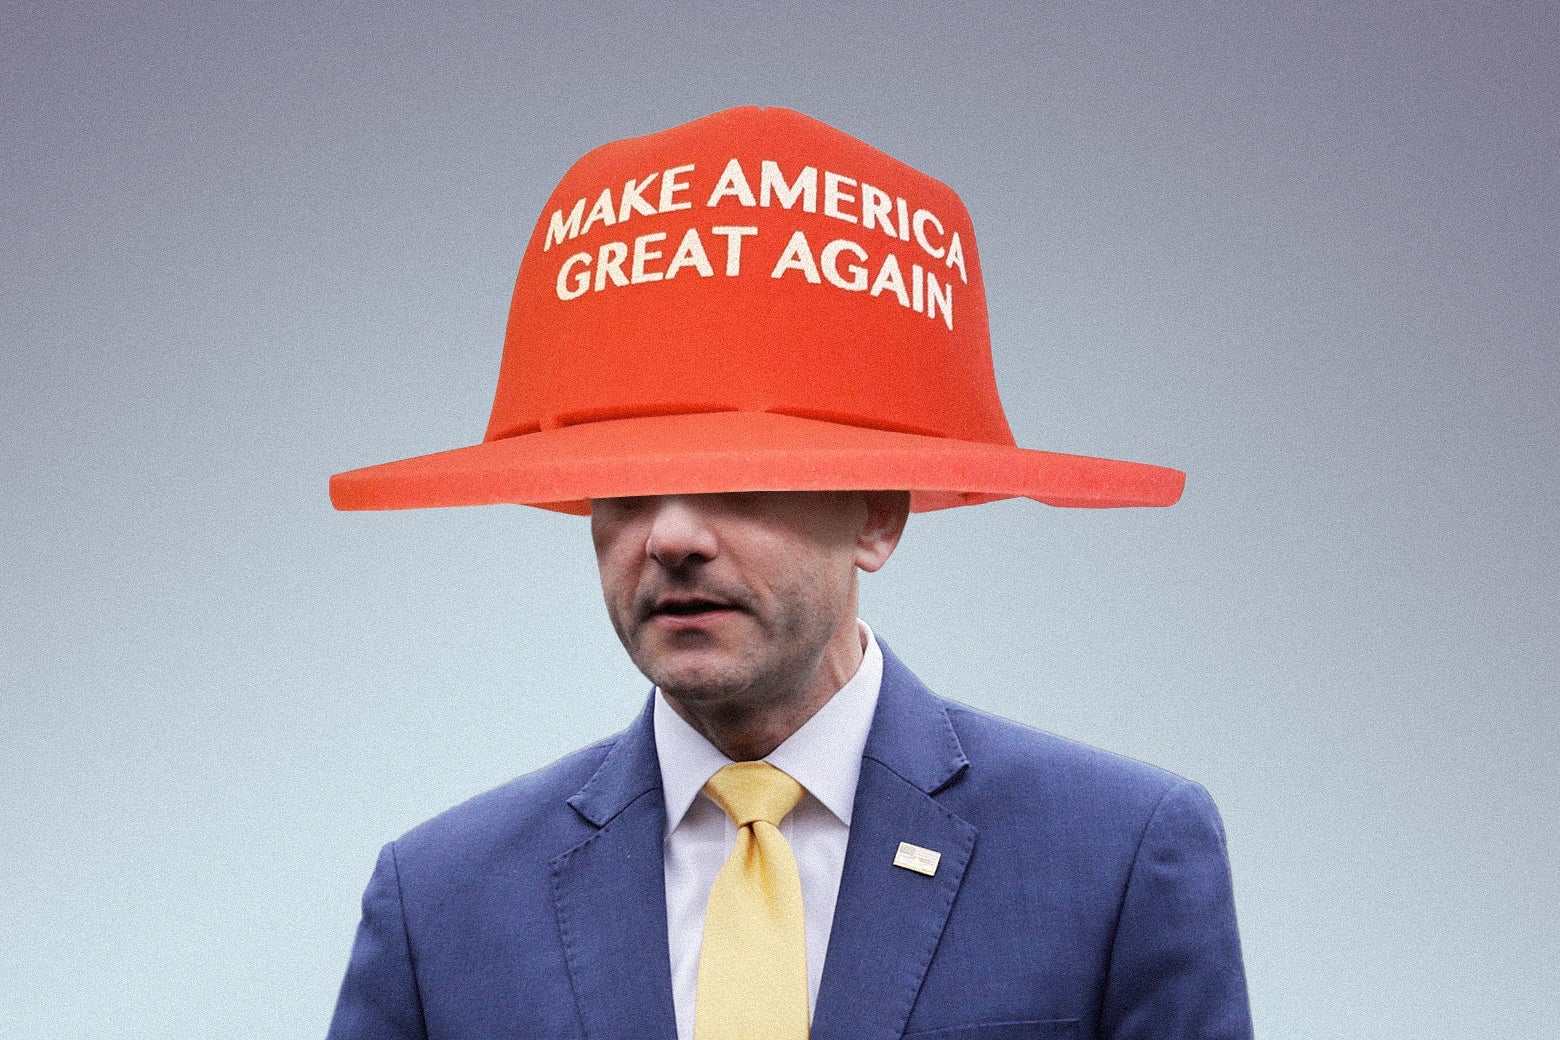 Ryan is seen in an enormous red Make America Great Again hat that is obscuring his eyes.